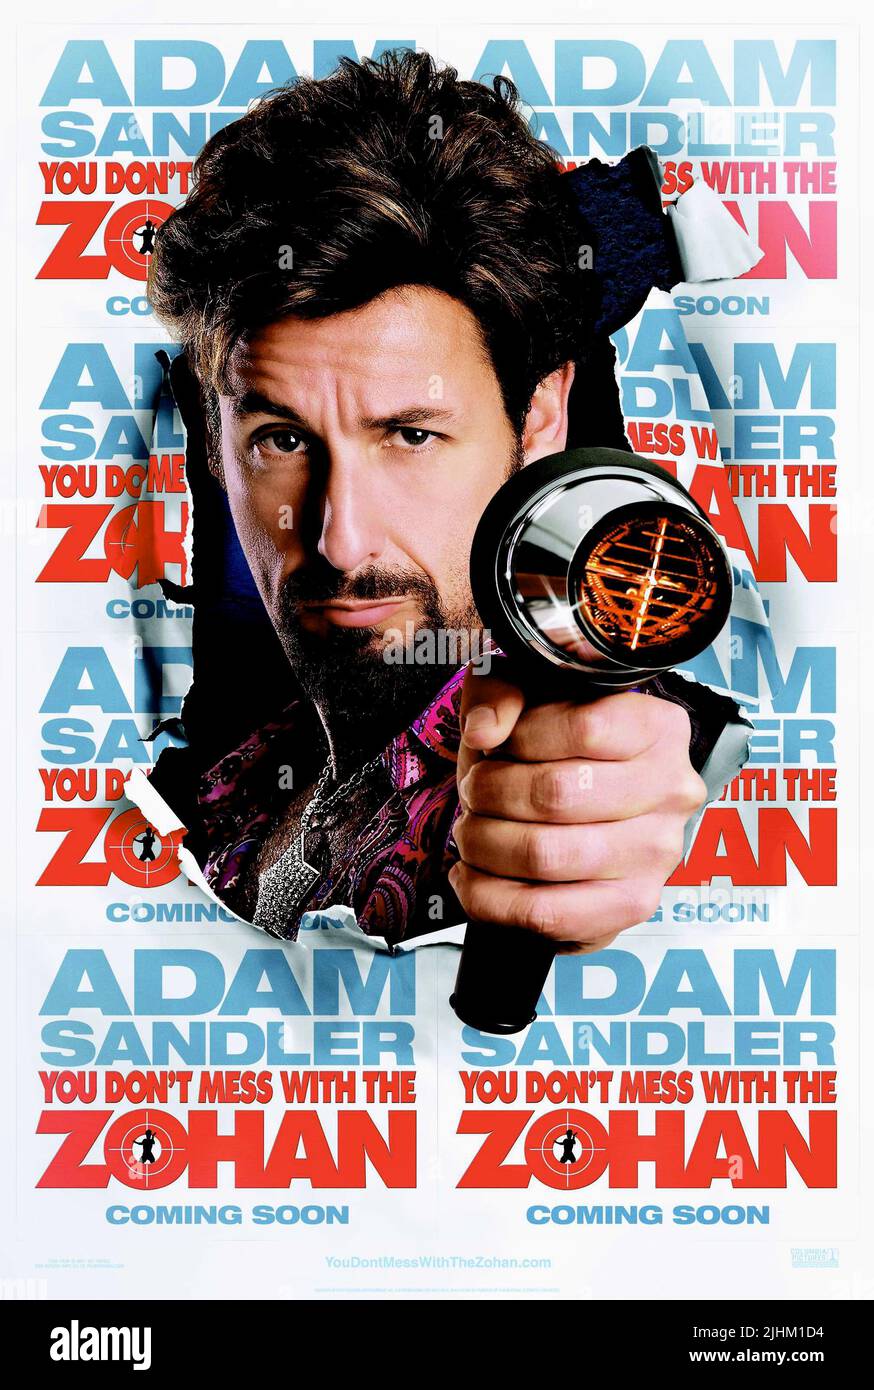 ADAM SANDLER POSTER, YOU DON'T MESS WITH THE ZOHAN, 2008 Stock Photo